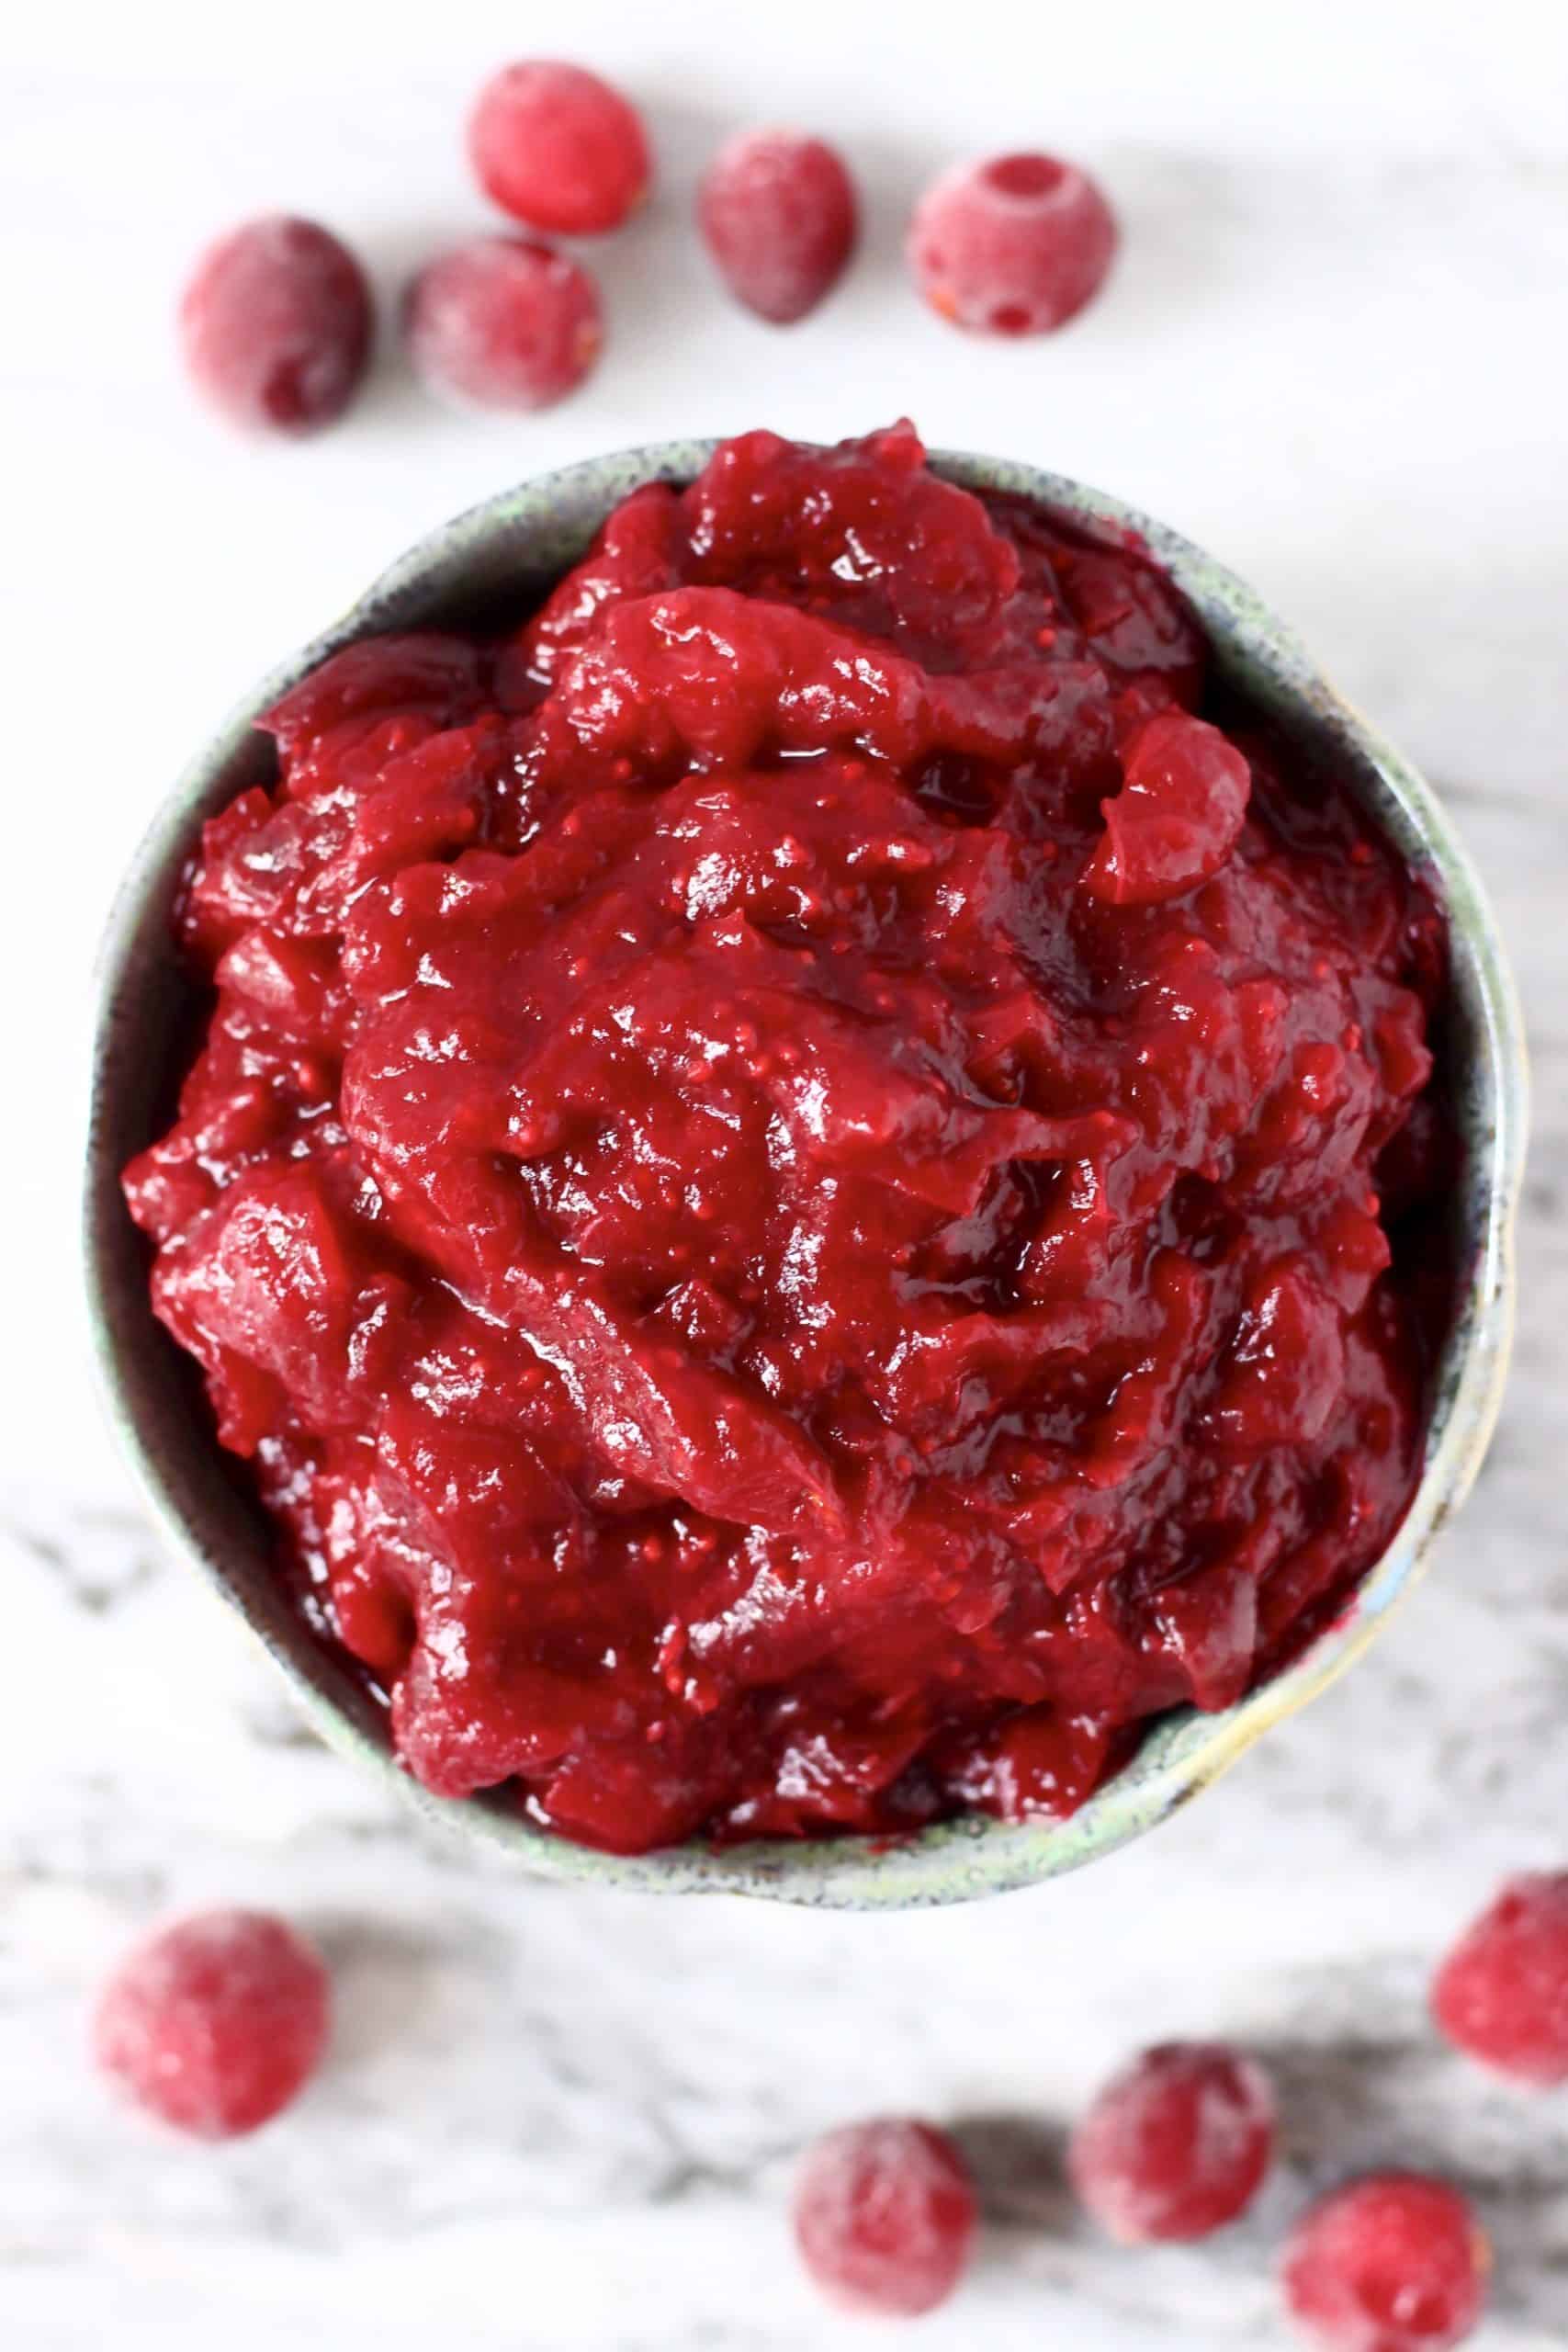 Cranberry sauce in a bowl against a marble background